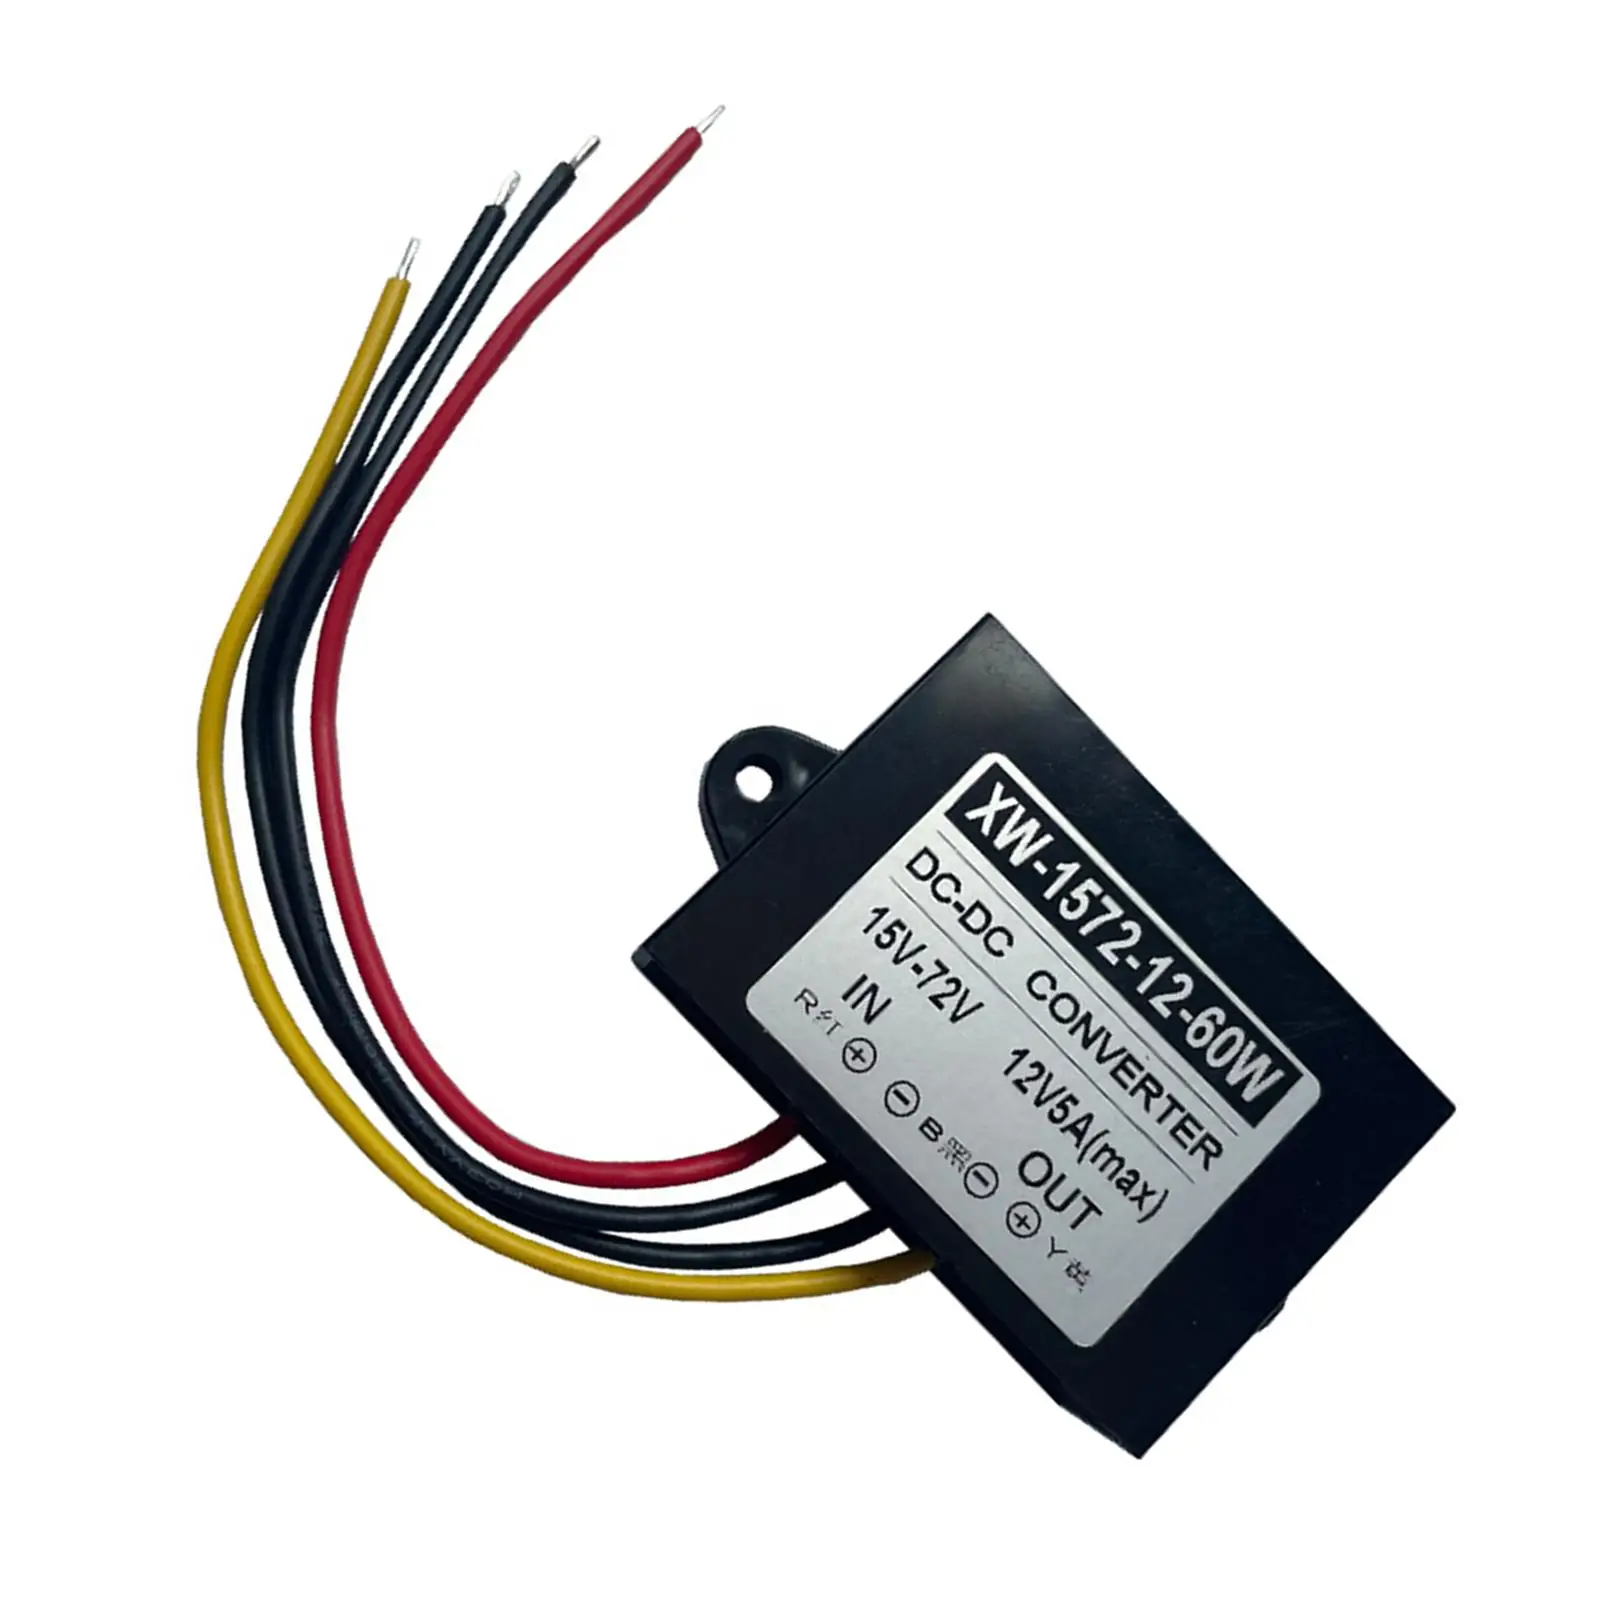 DC15-72V to DC12V 1A 60W Buck Converter Power DC IP67 Buck Converter for Scooters Bicycles Golf Cart Golf Cart